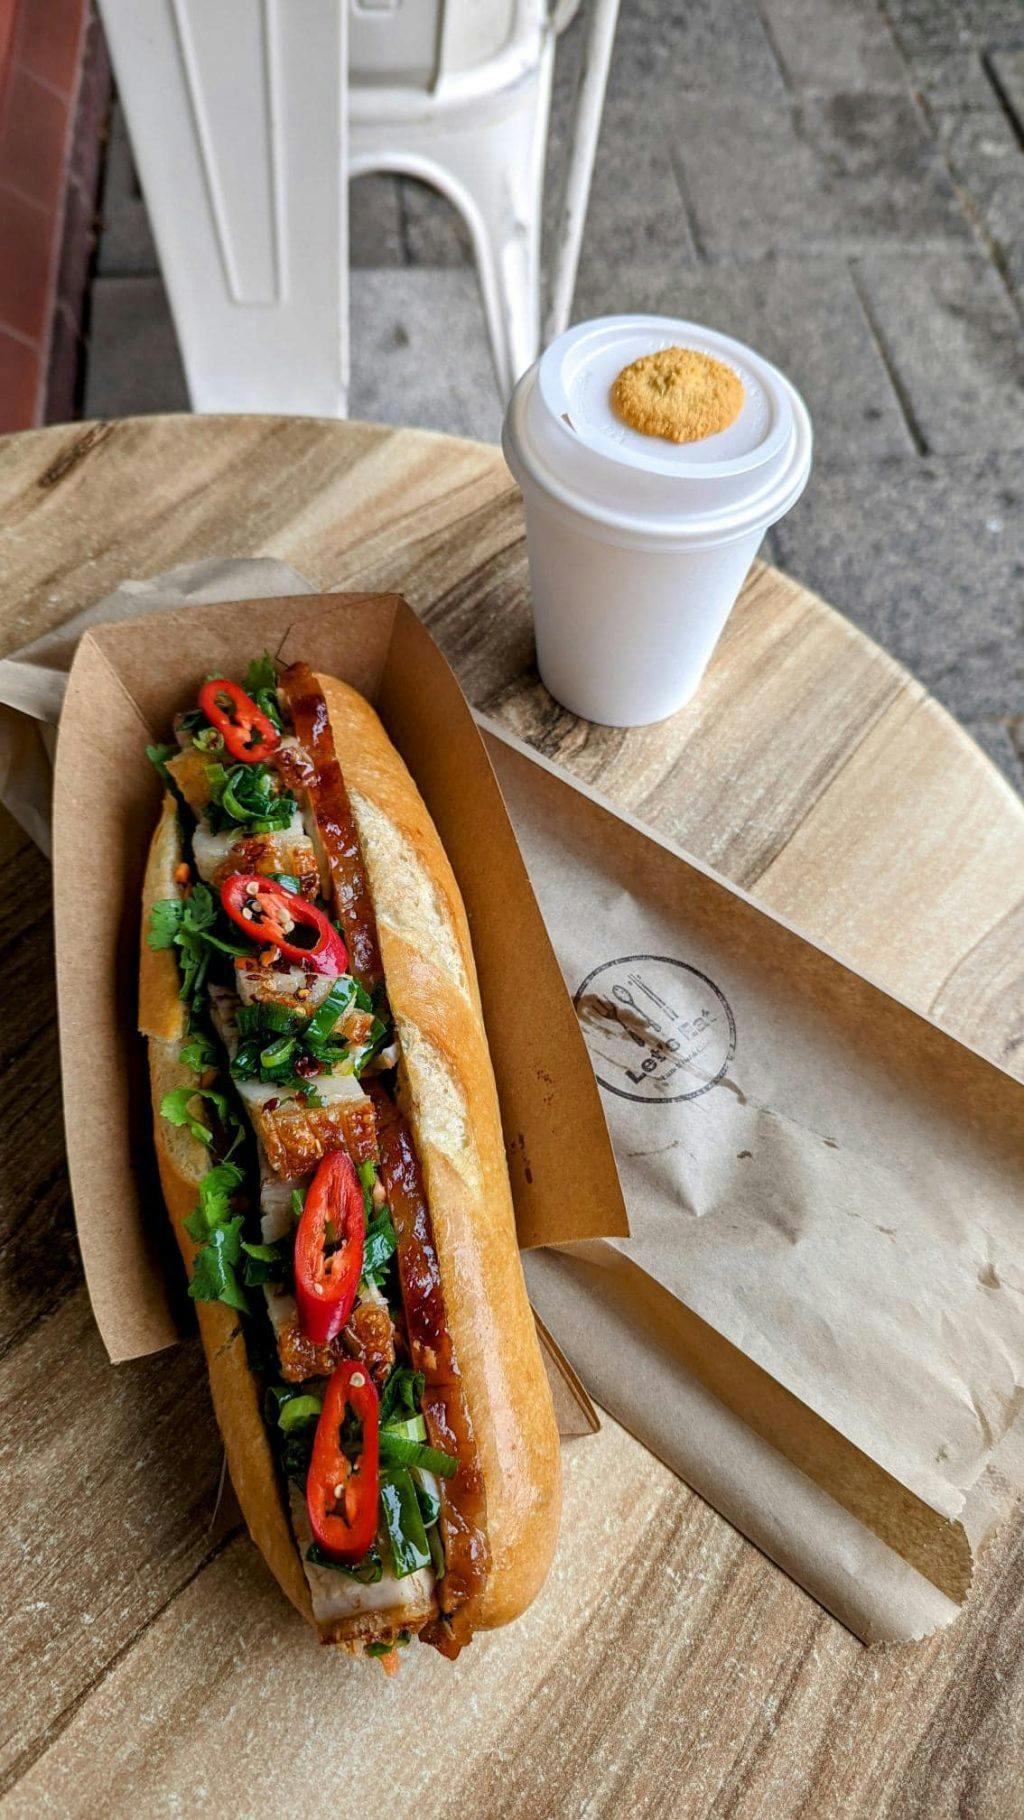 Perth's best banh mi, Let's Eat Lunch Bar West Perth